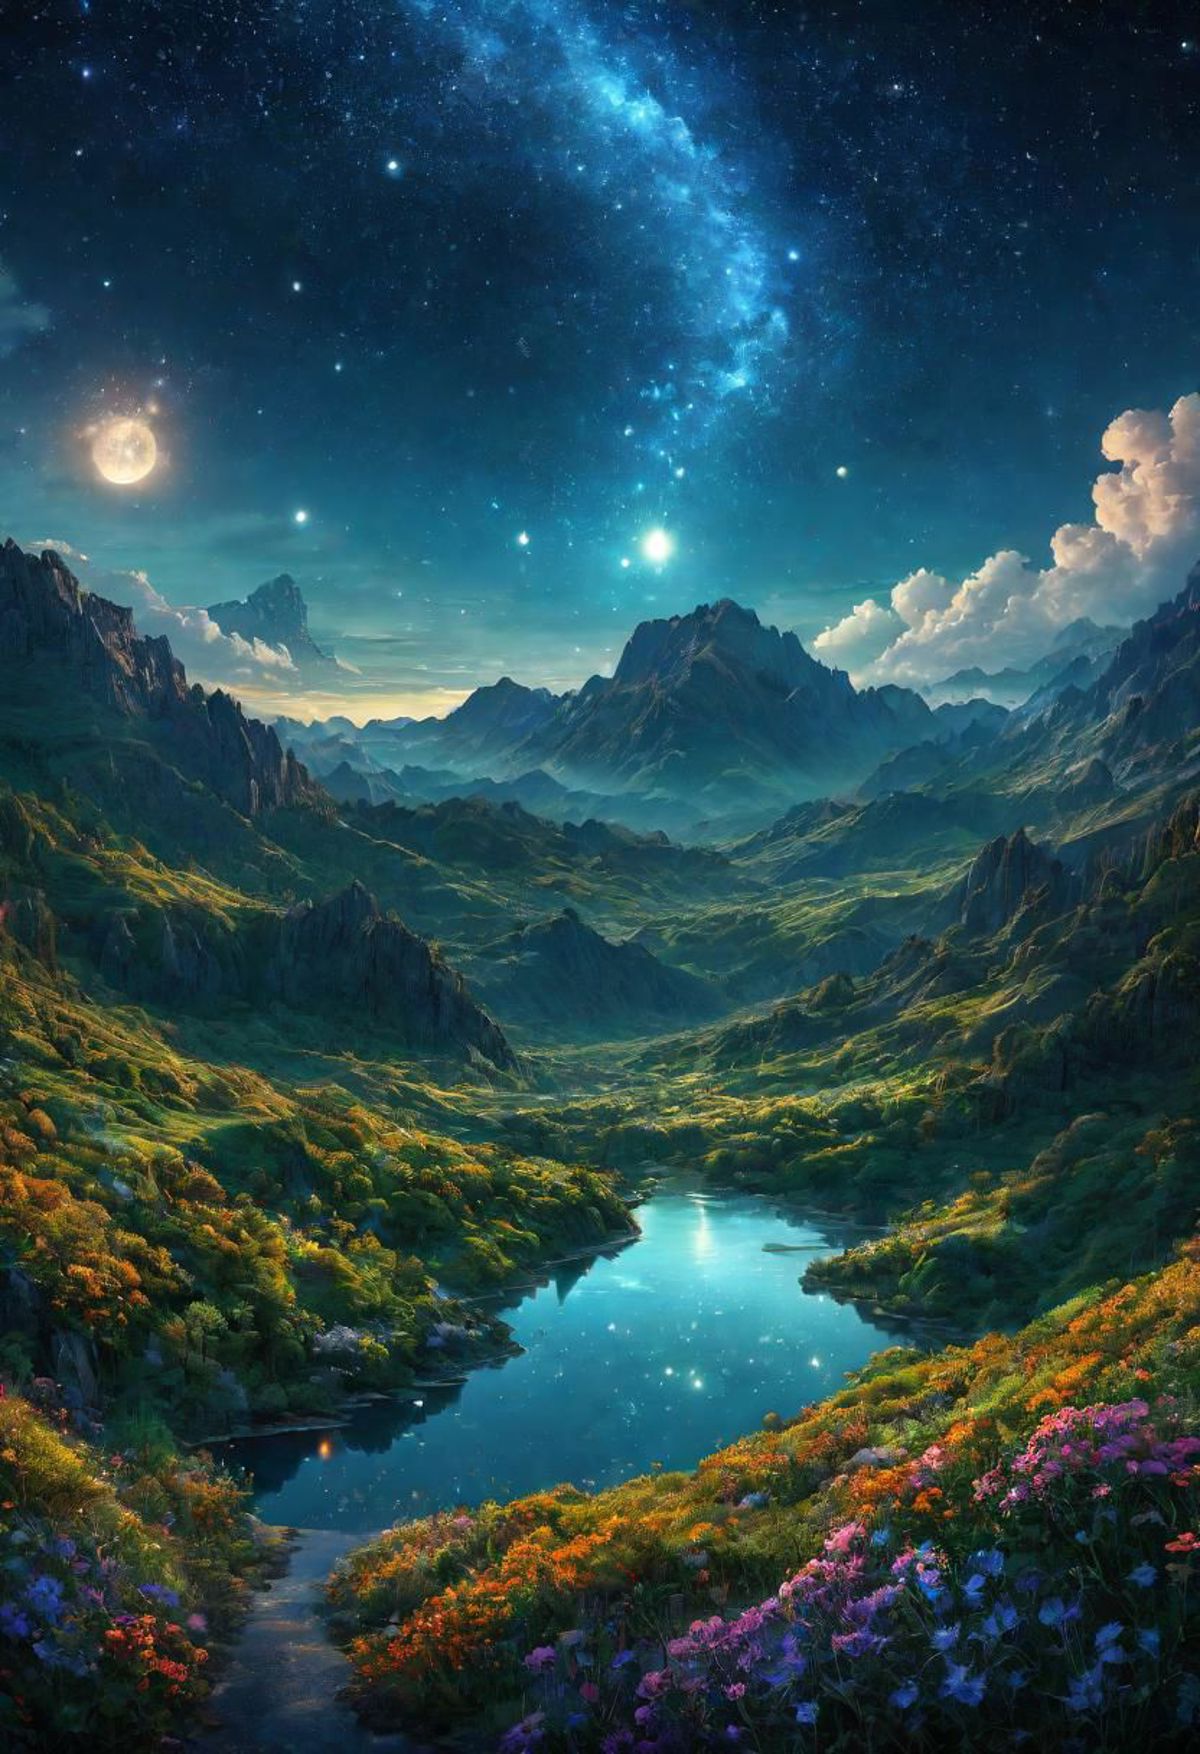 A painting of a mountainous landscape with a valley, water, and a starry night sky.